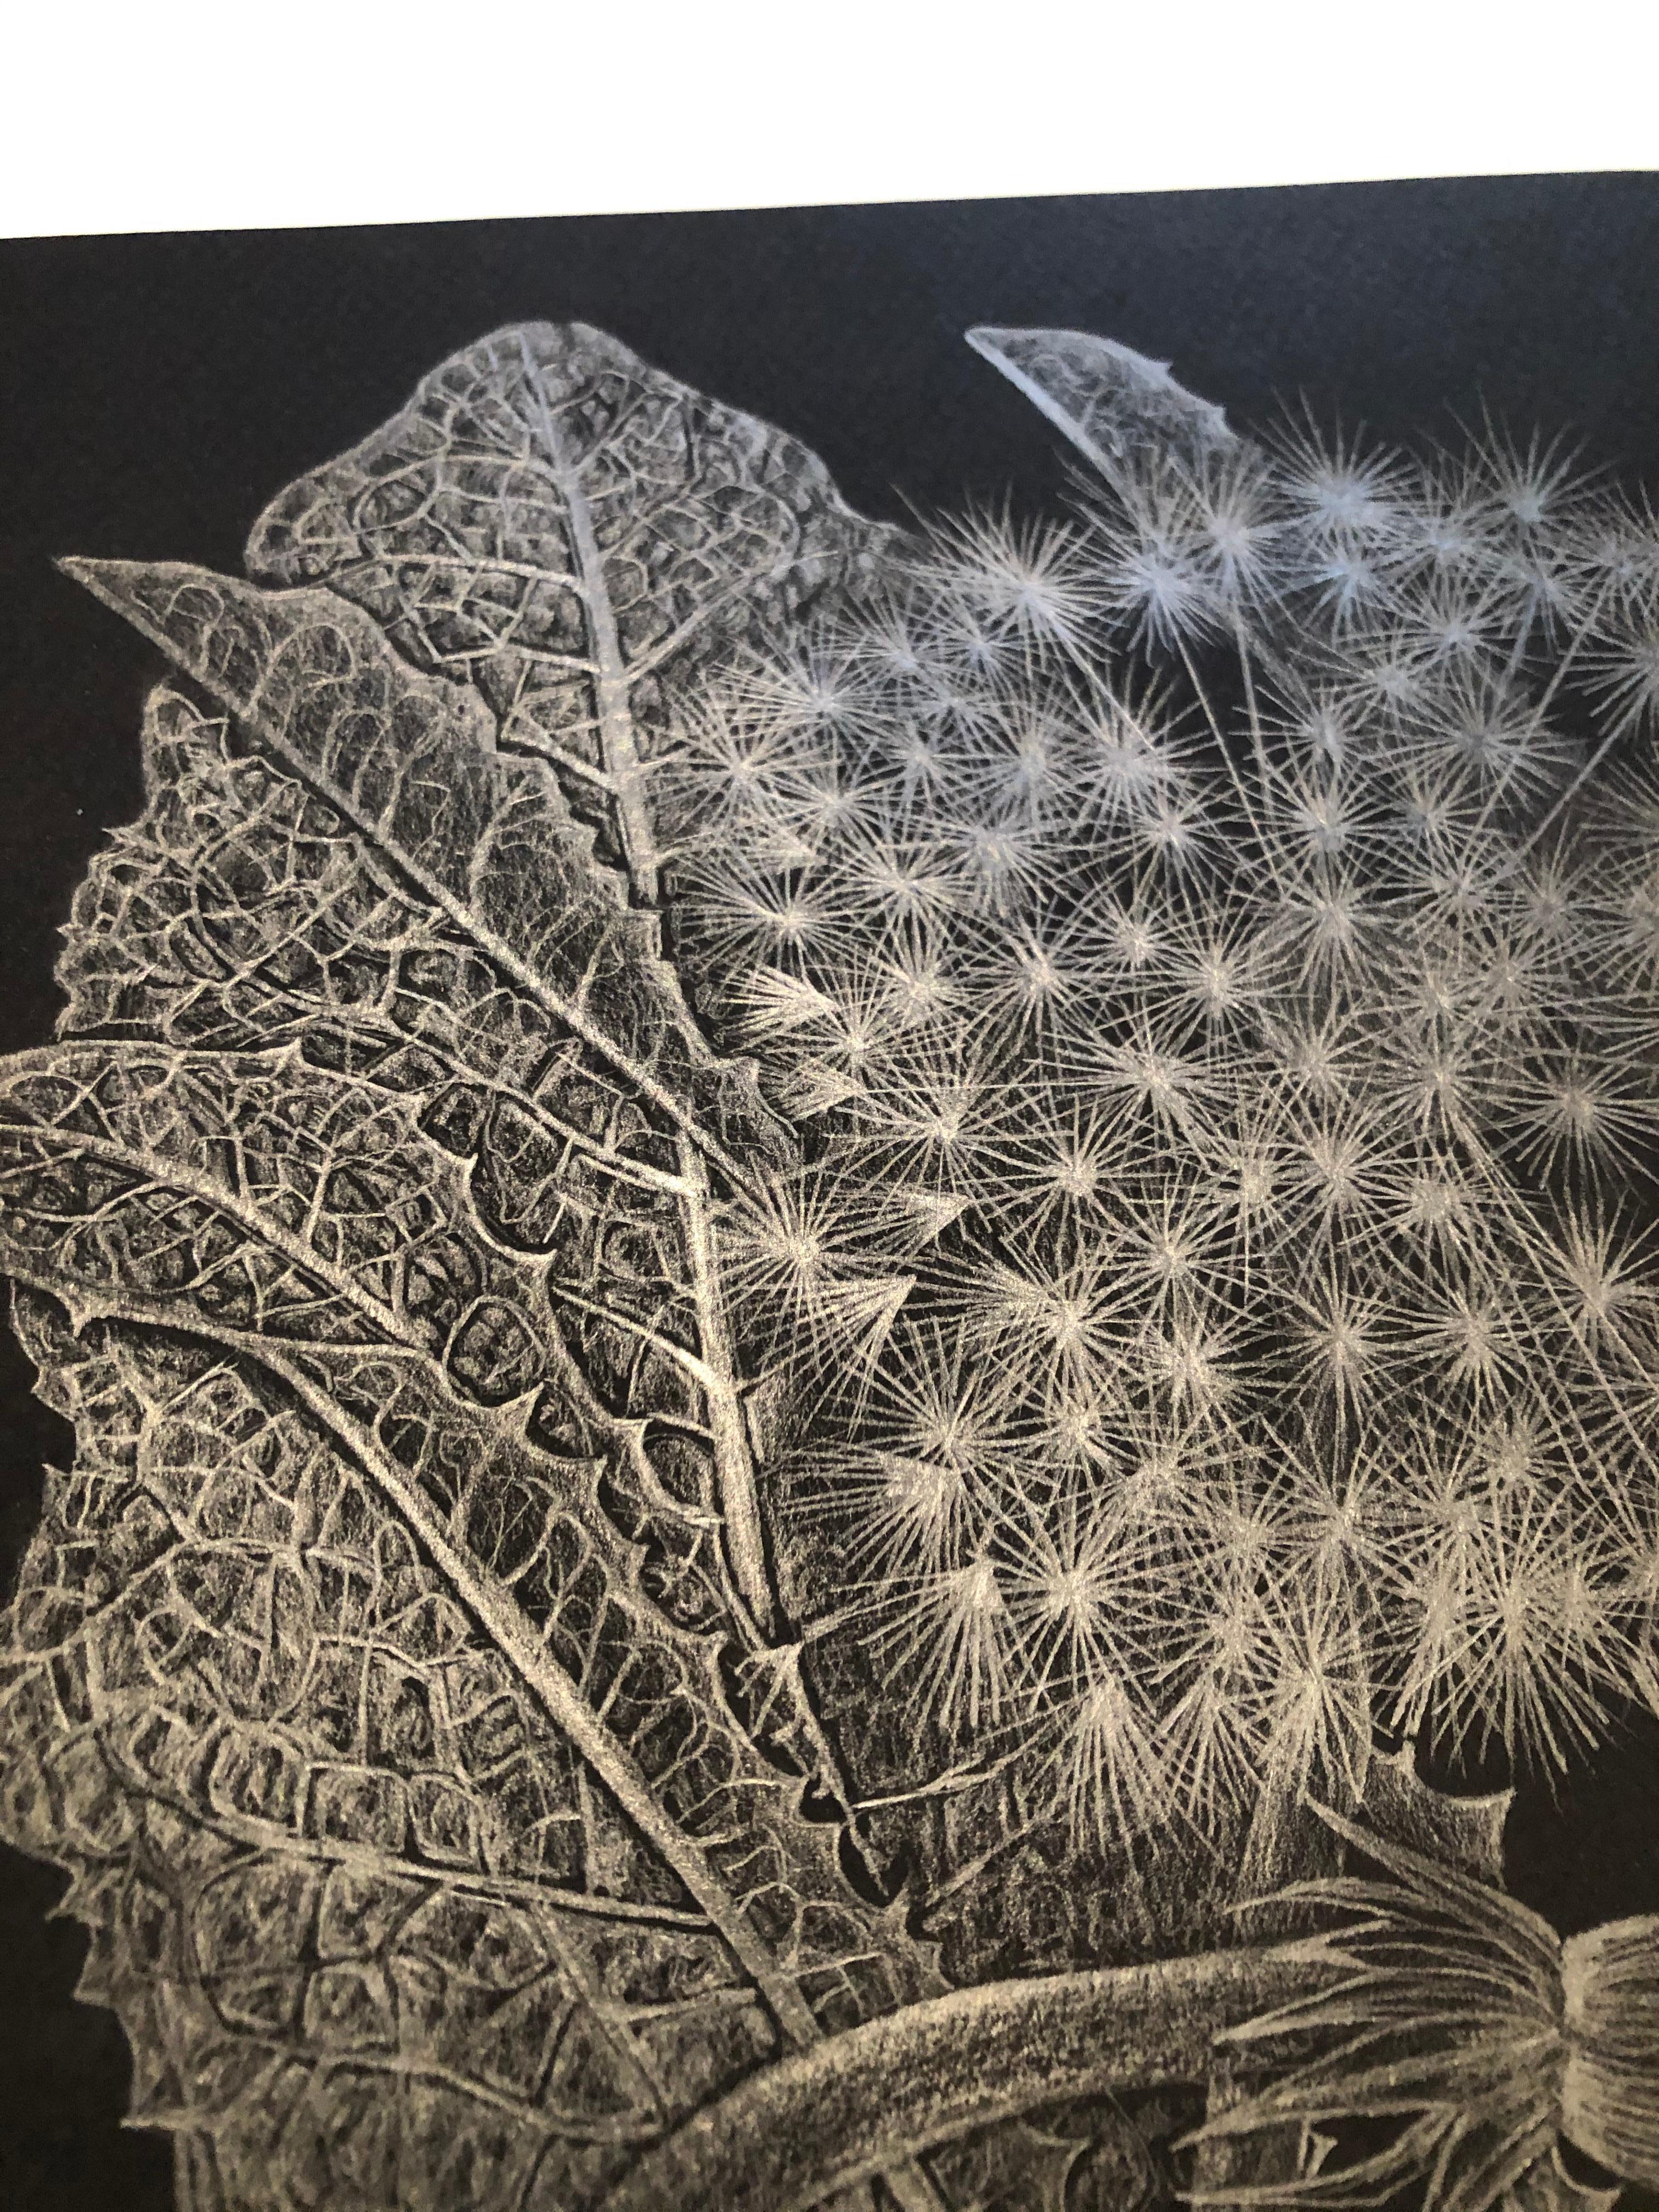 Dandelion with Bud, contemporary realist silver floral graphite drawing, 2019 - American Realist Art by Margot Glass